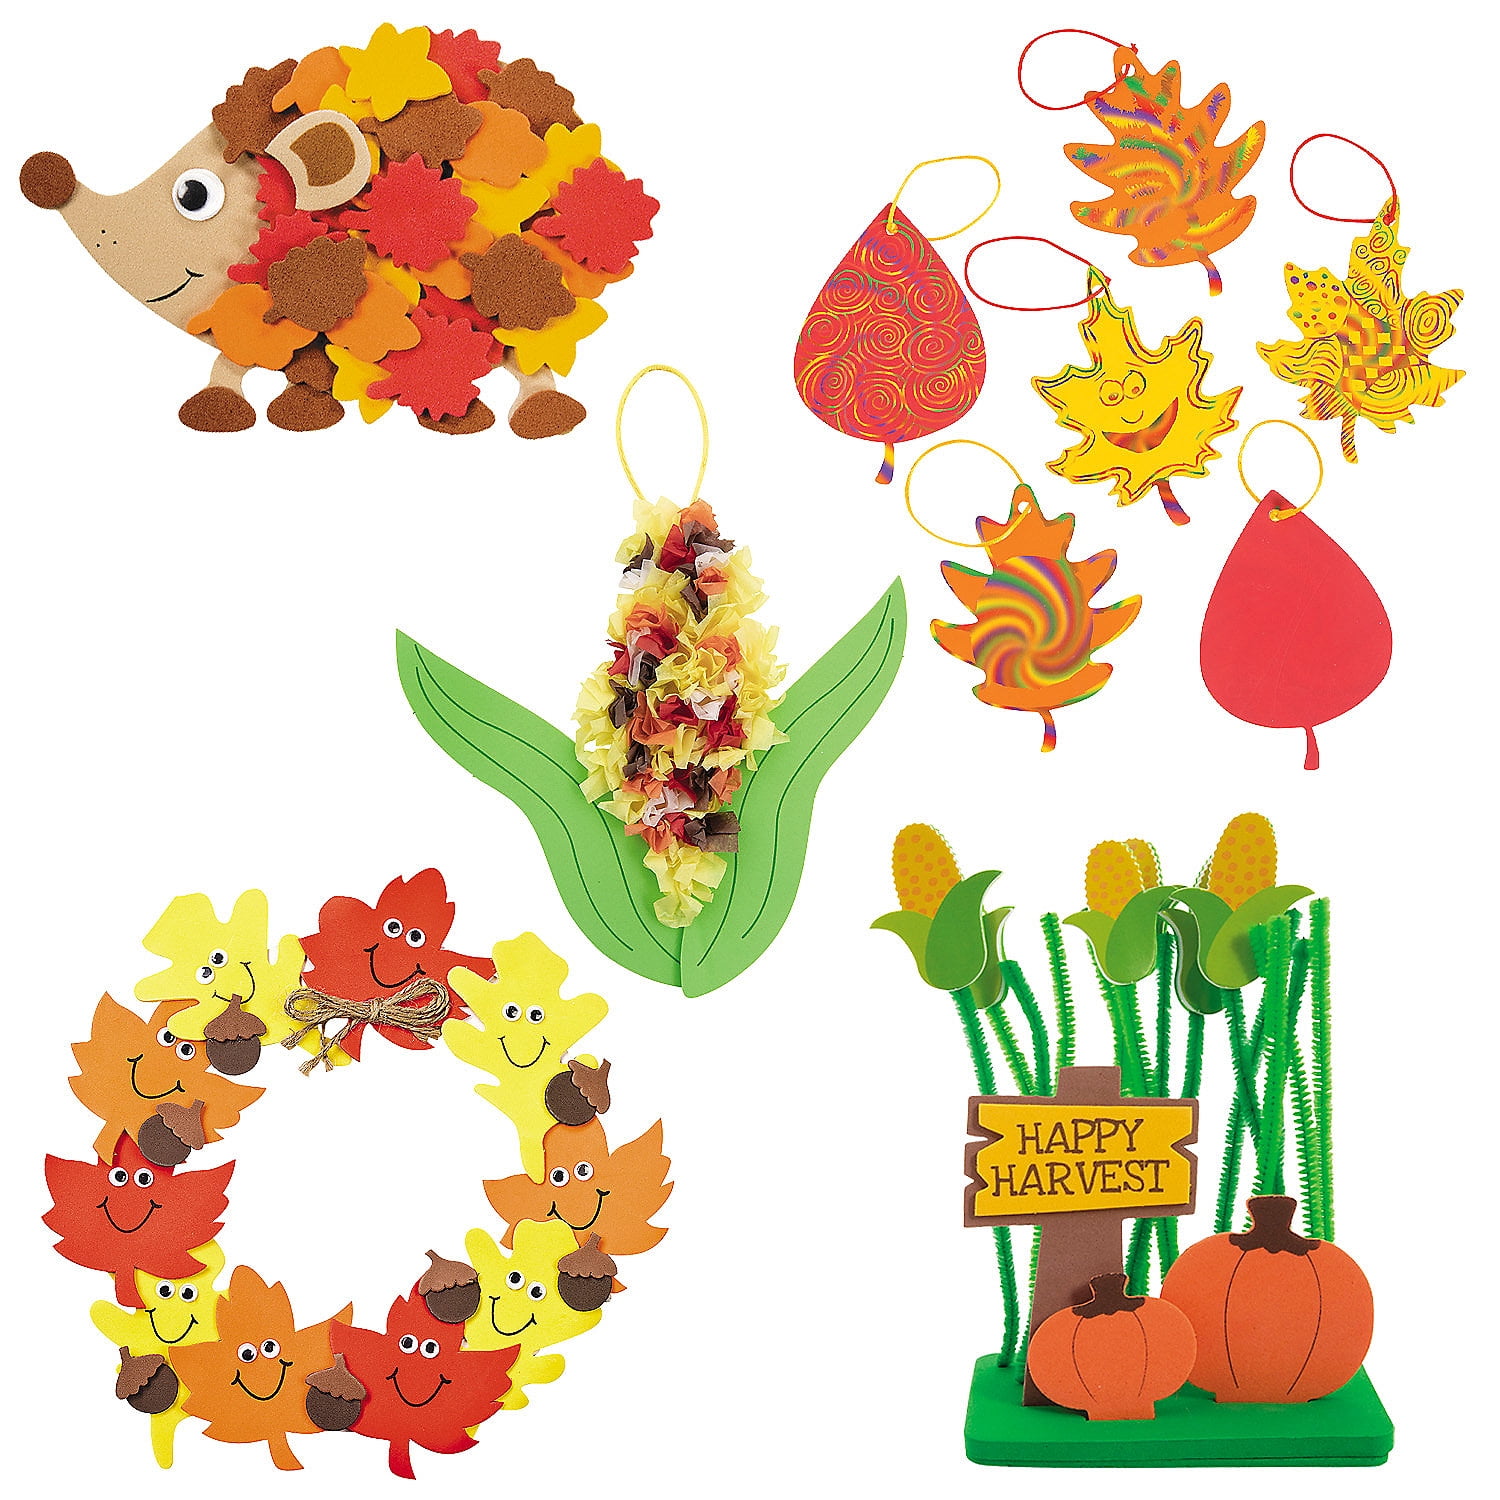 Kid Made Modern - Fall Craft Kit - 150+ Piece Collection - DIY Kids Crafts  - Bulk Craft Set - Create Your Own Art - Includes Fall Inspired Art